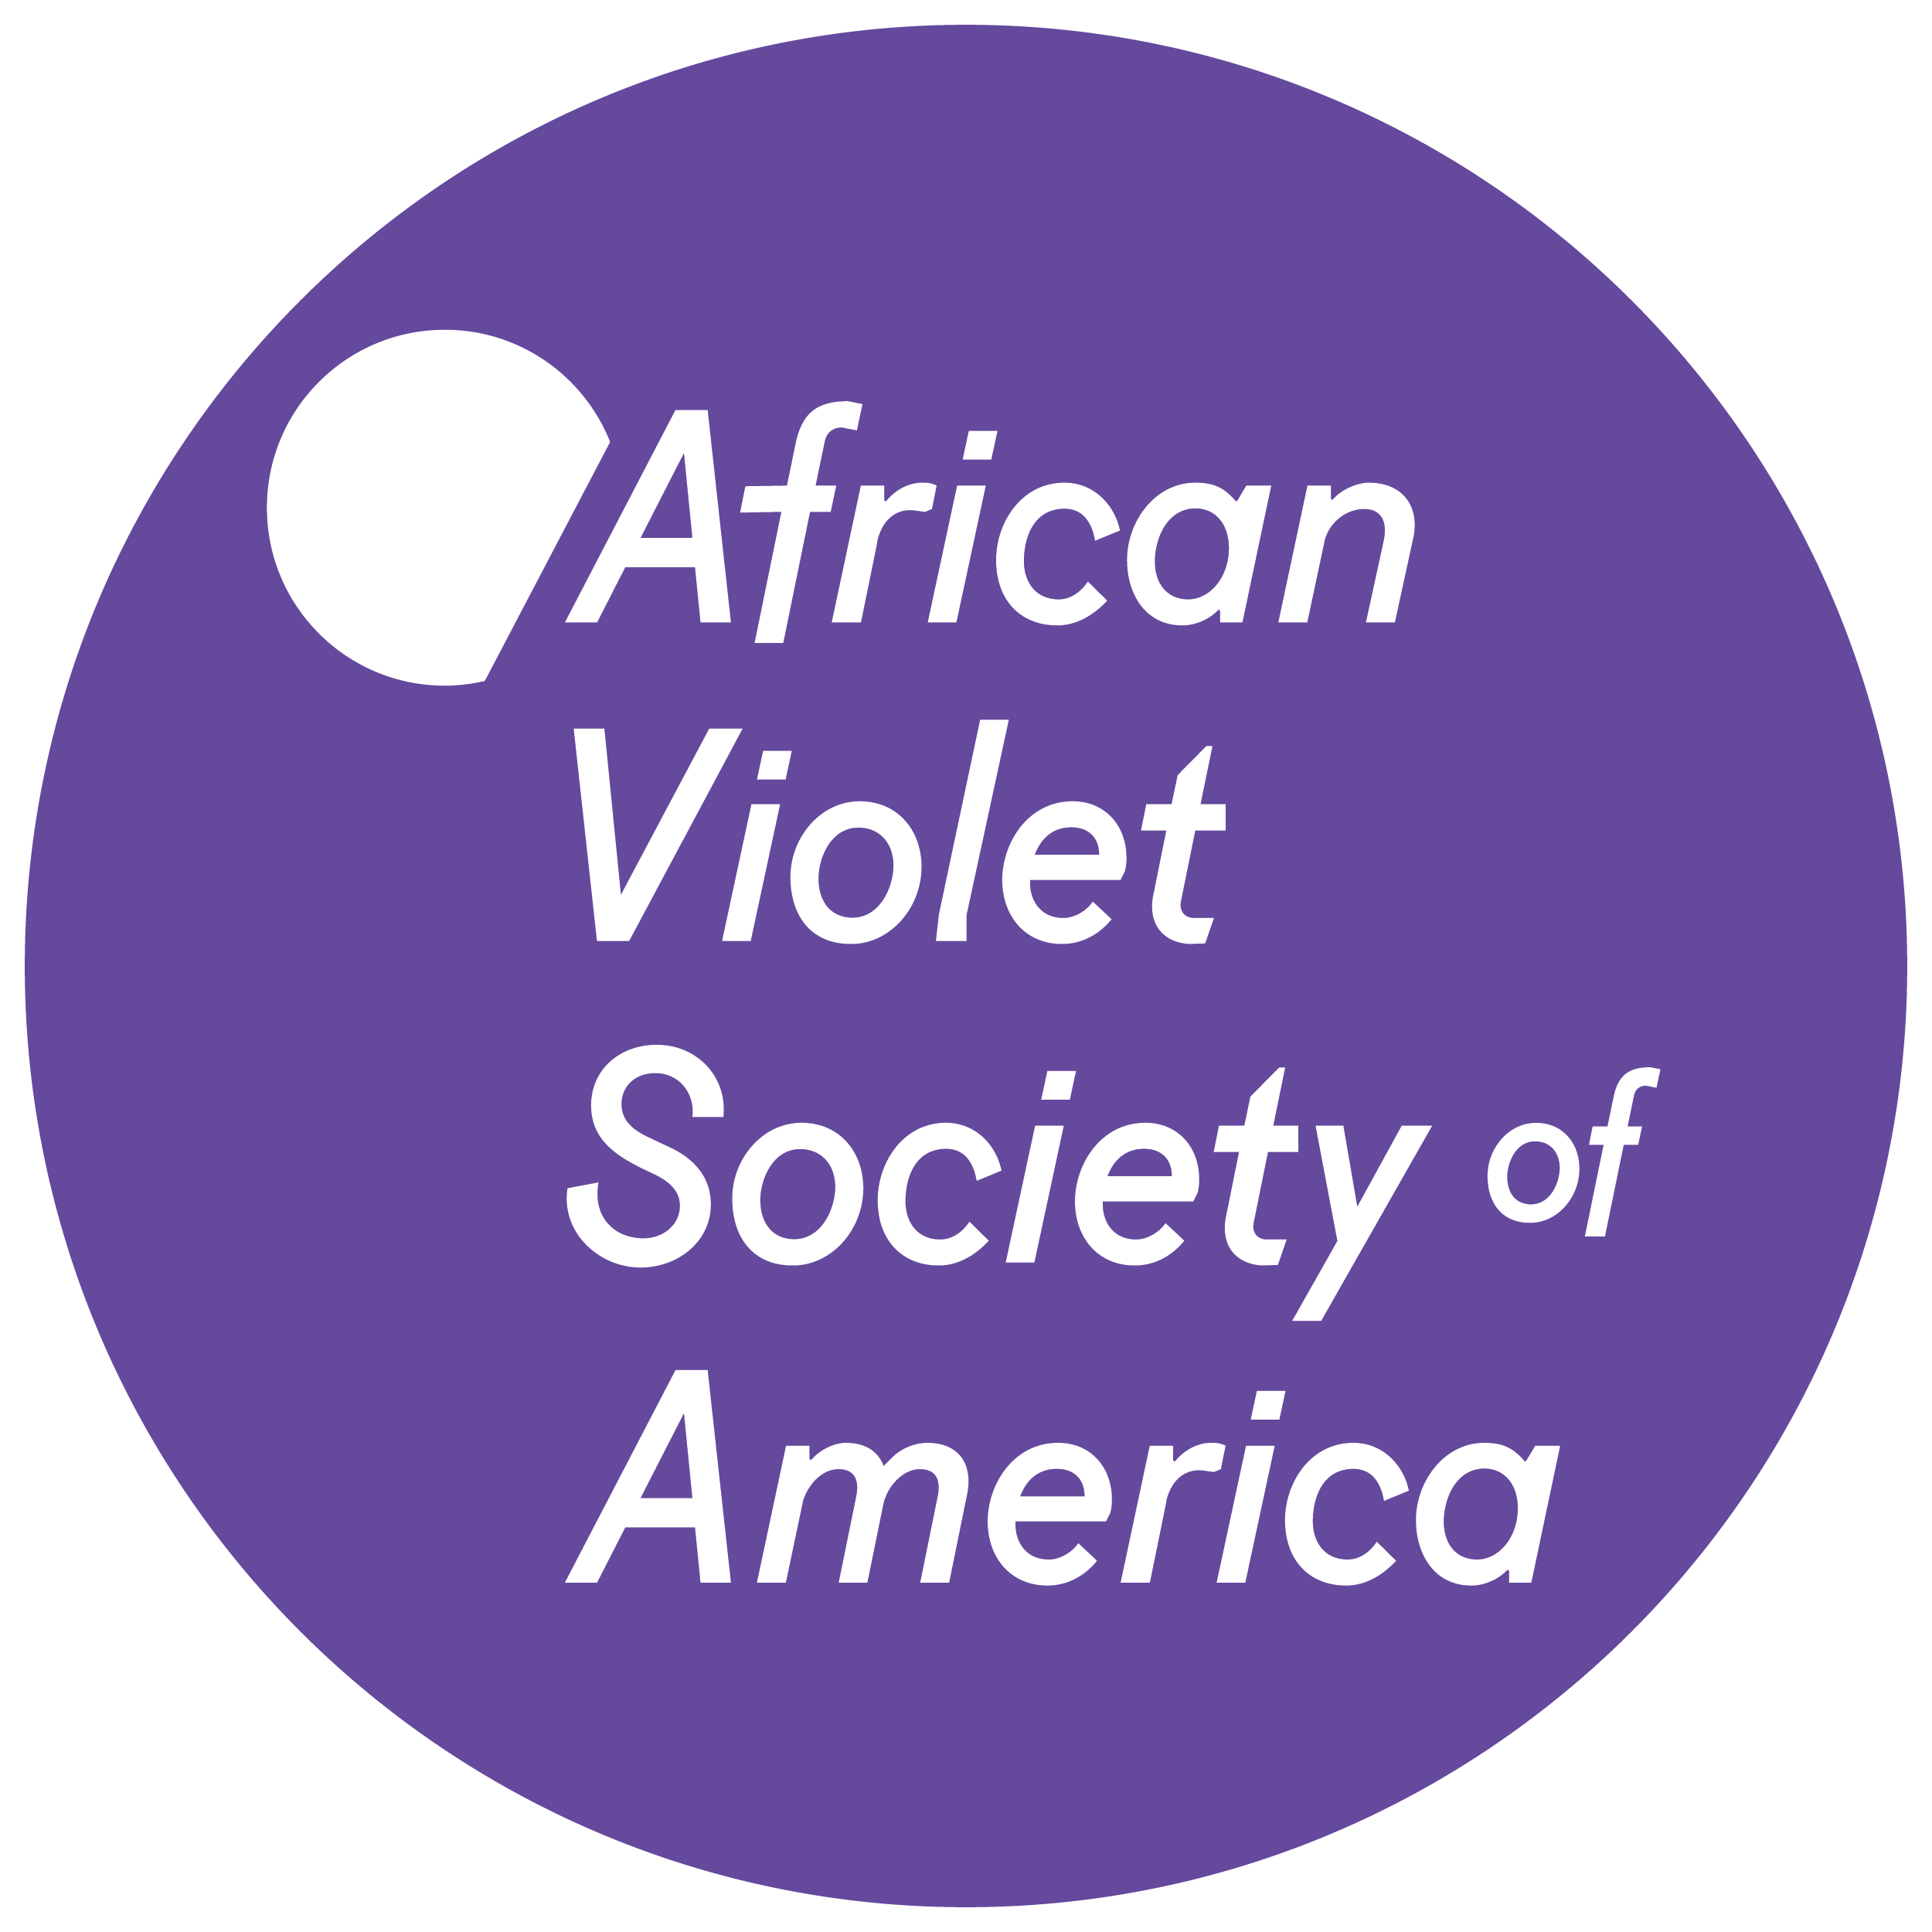 Image of American Violet Society website